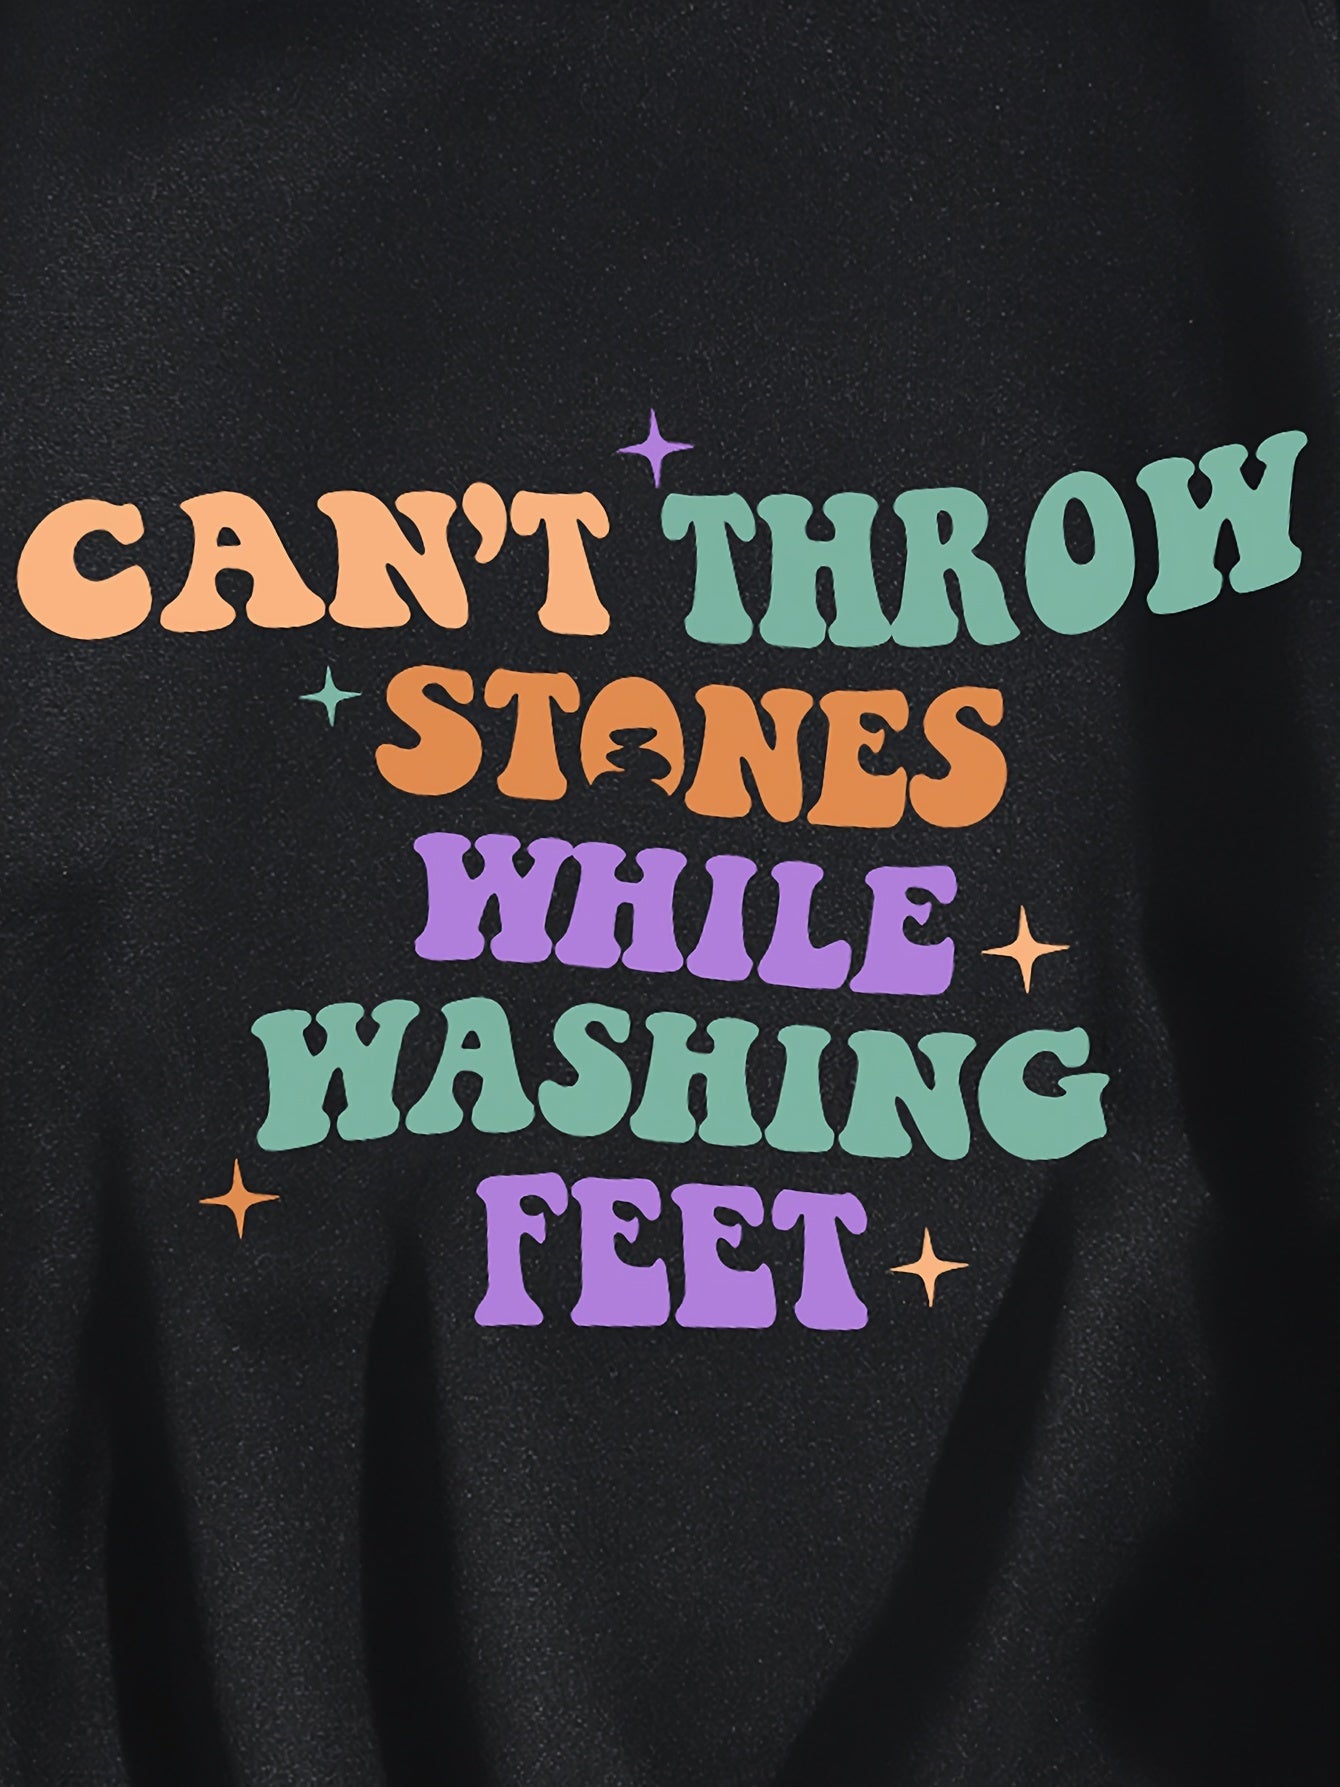 Can't Throw Stones While Washing Feet Plus Size  Women's Christian Pullover Hooded Sweatshirt claimedbygoddesigns